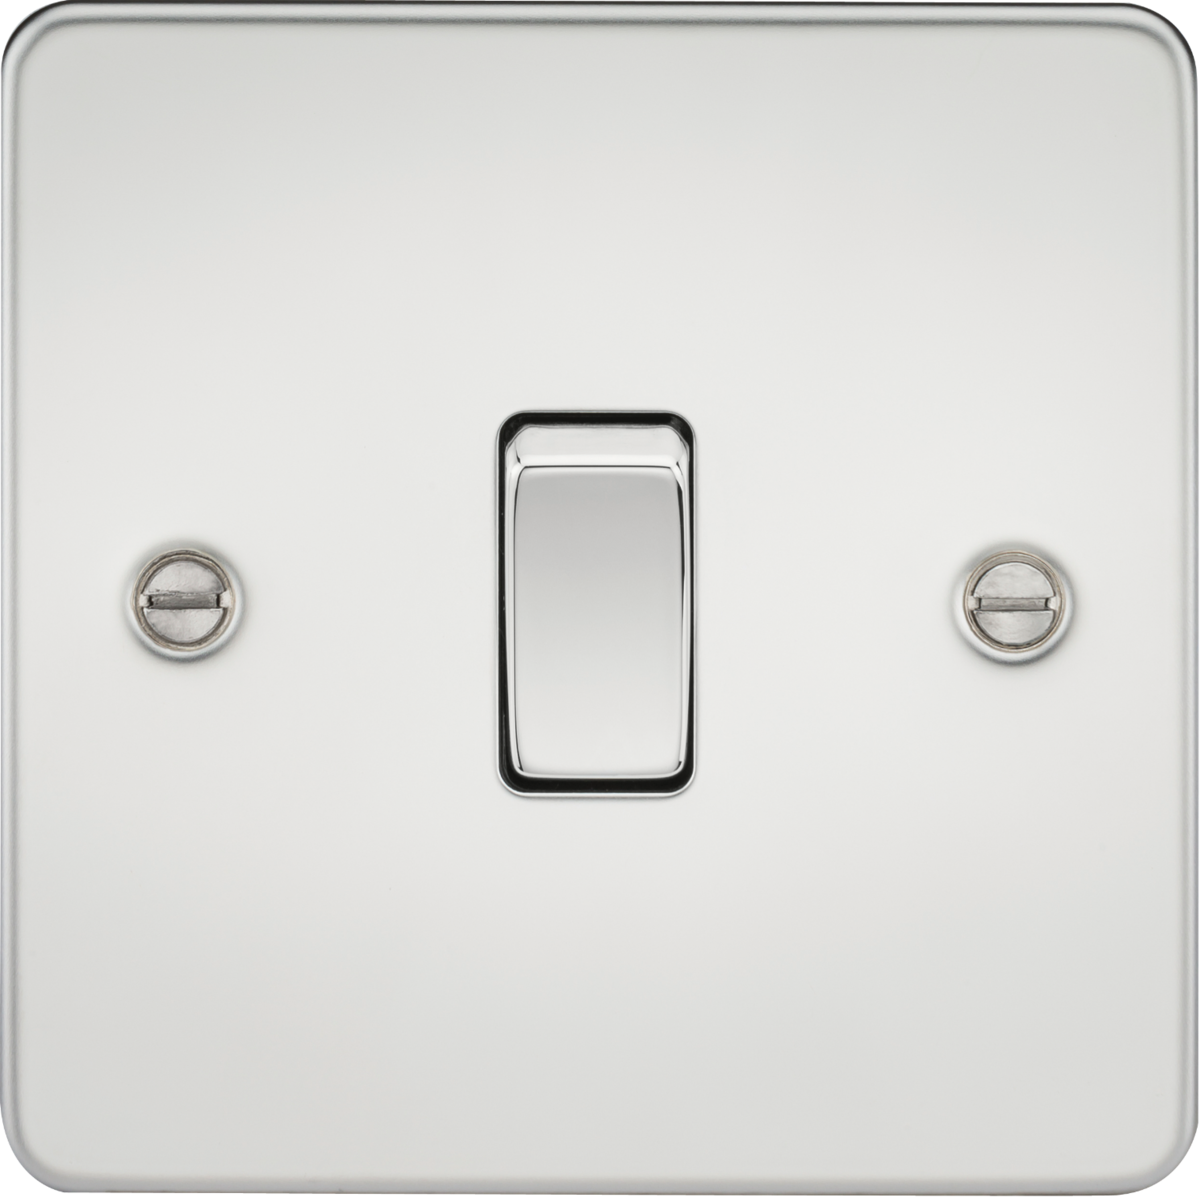 Polished Chrome -  Flat Plate Switches and Sockets